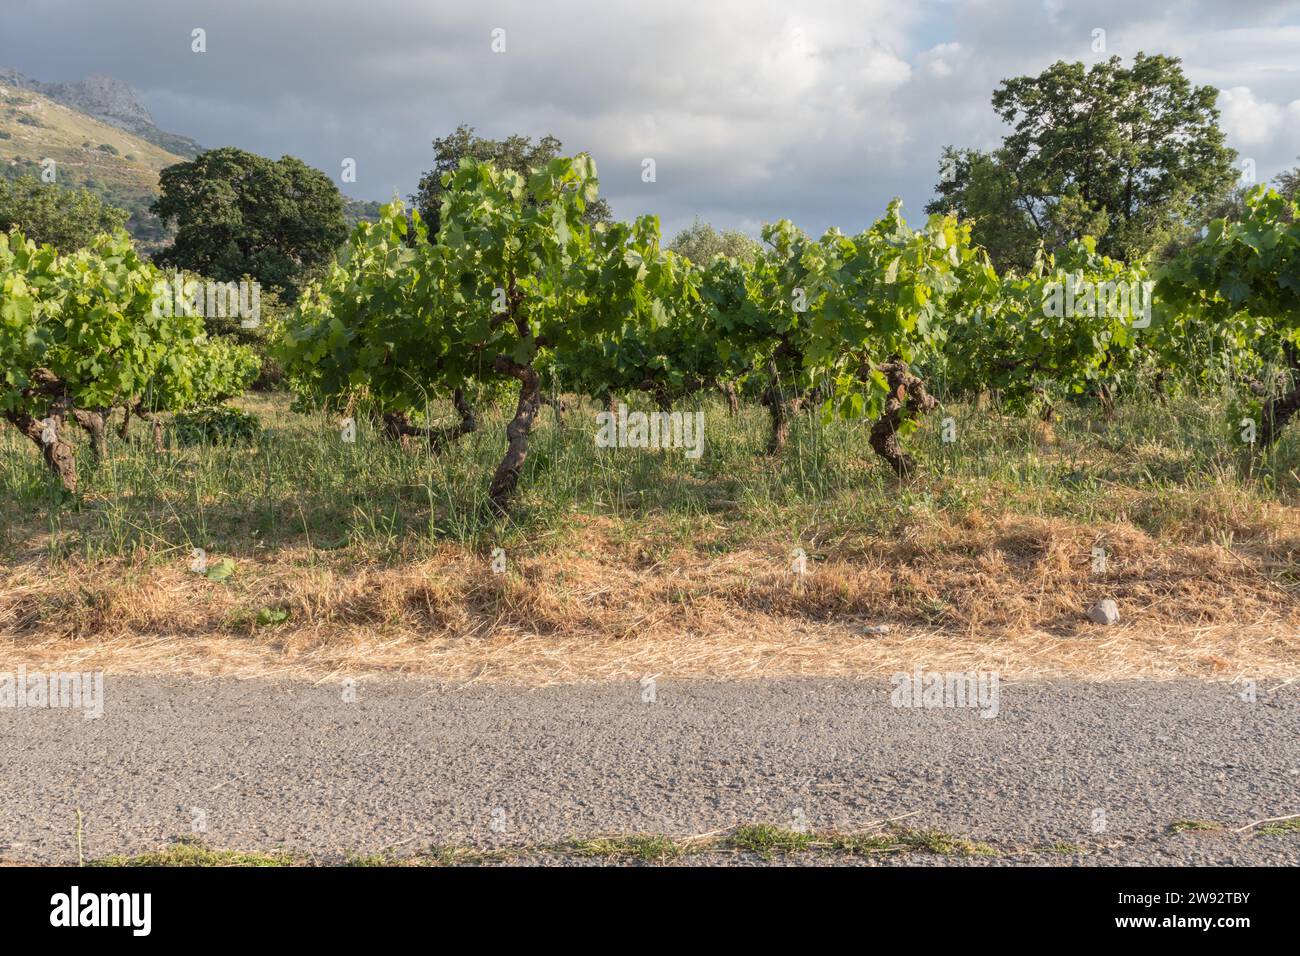 View of a vineyard in Greece on a cloudy day. Stock Photo